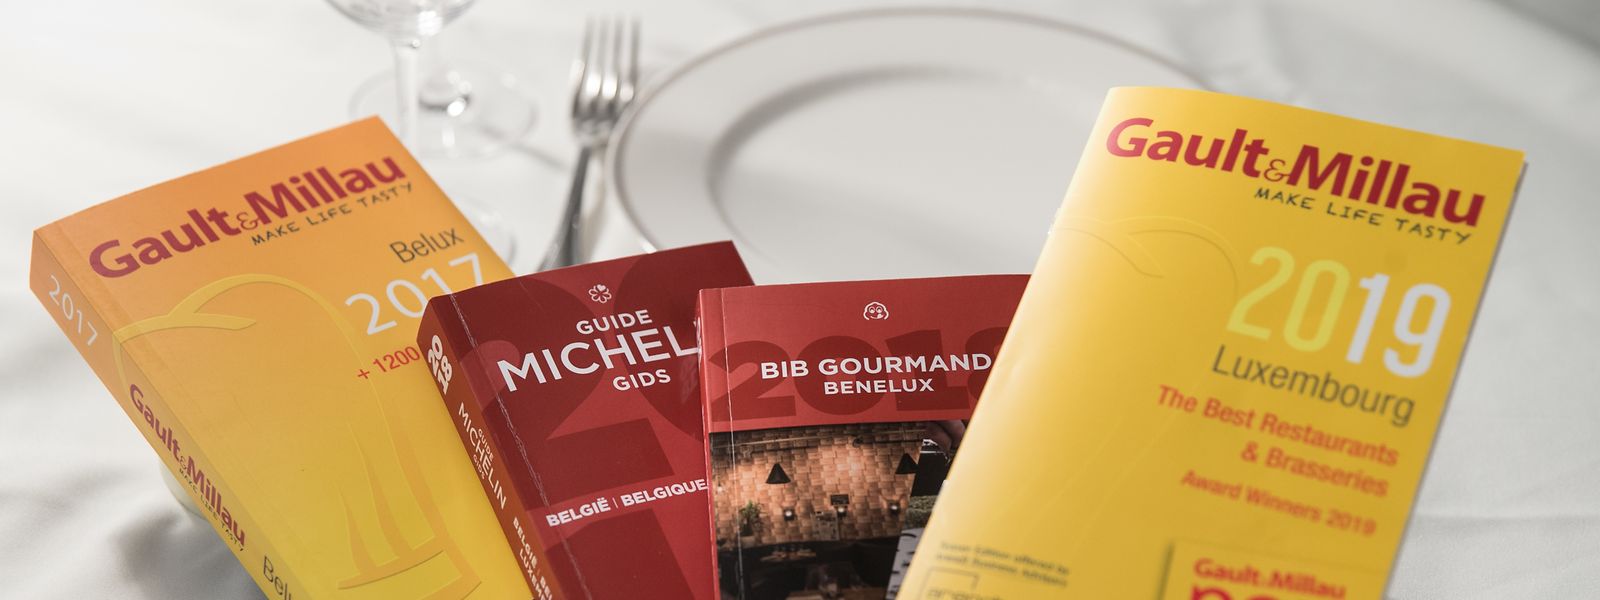 Guide Michelin,Guide Gault&Millau.Foto:Gerry Huberty